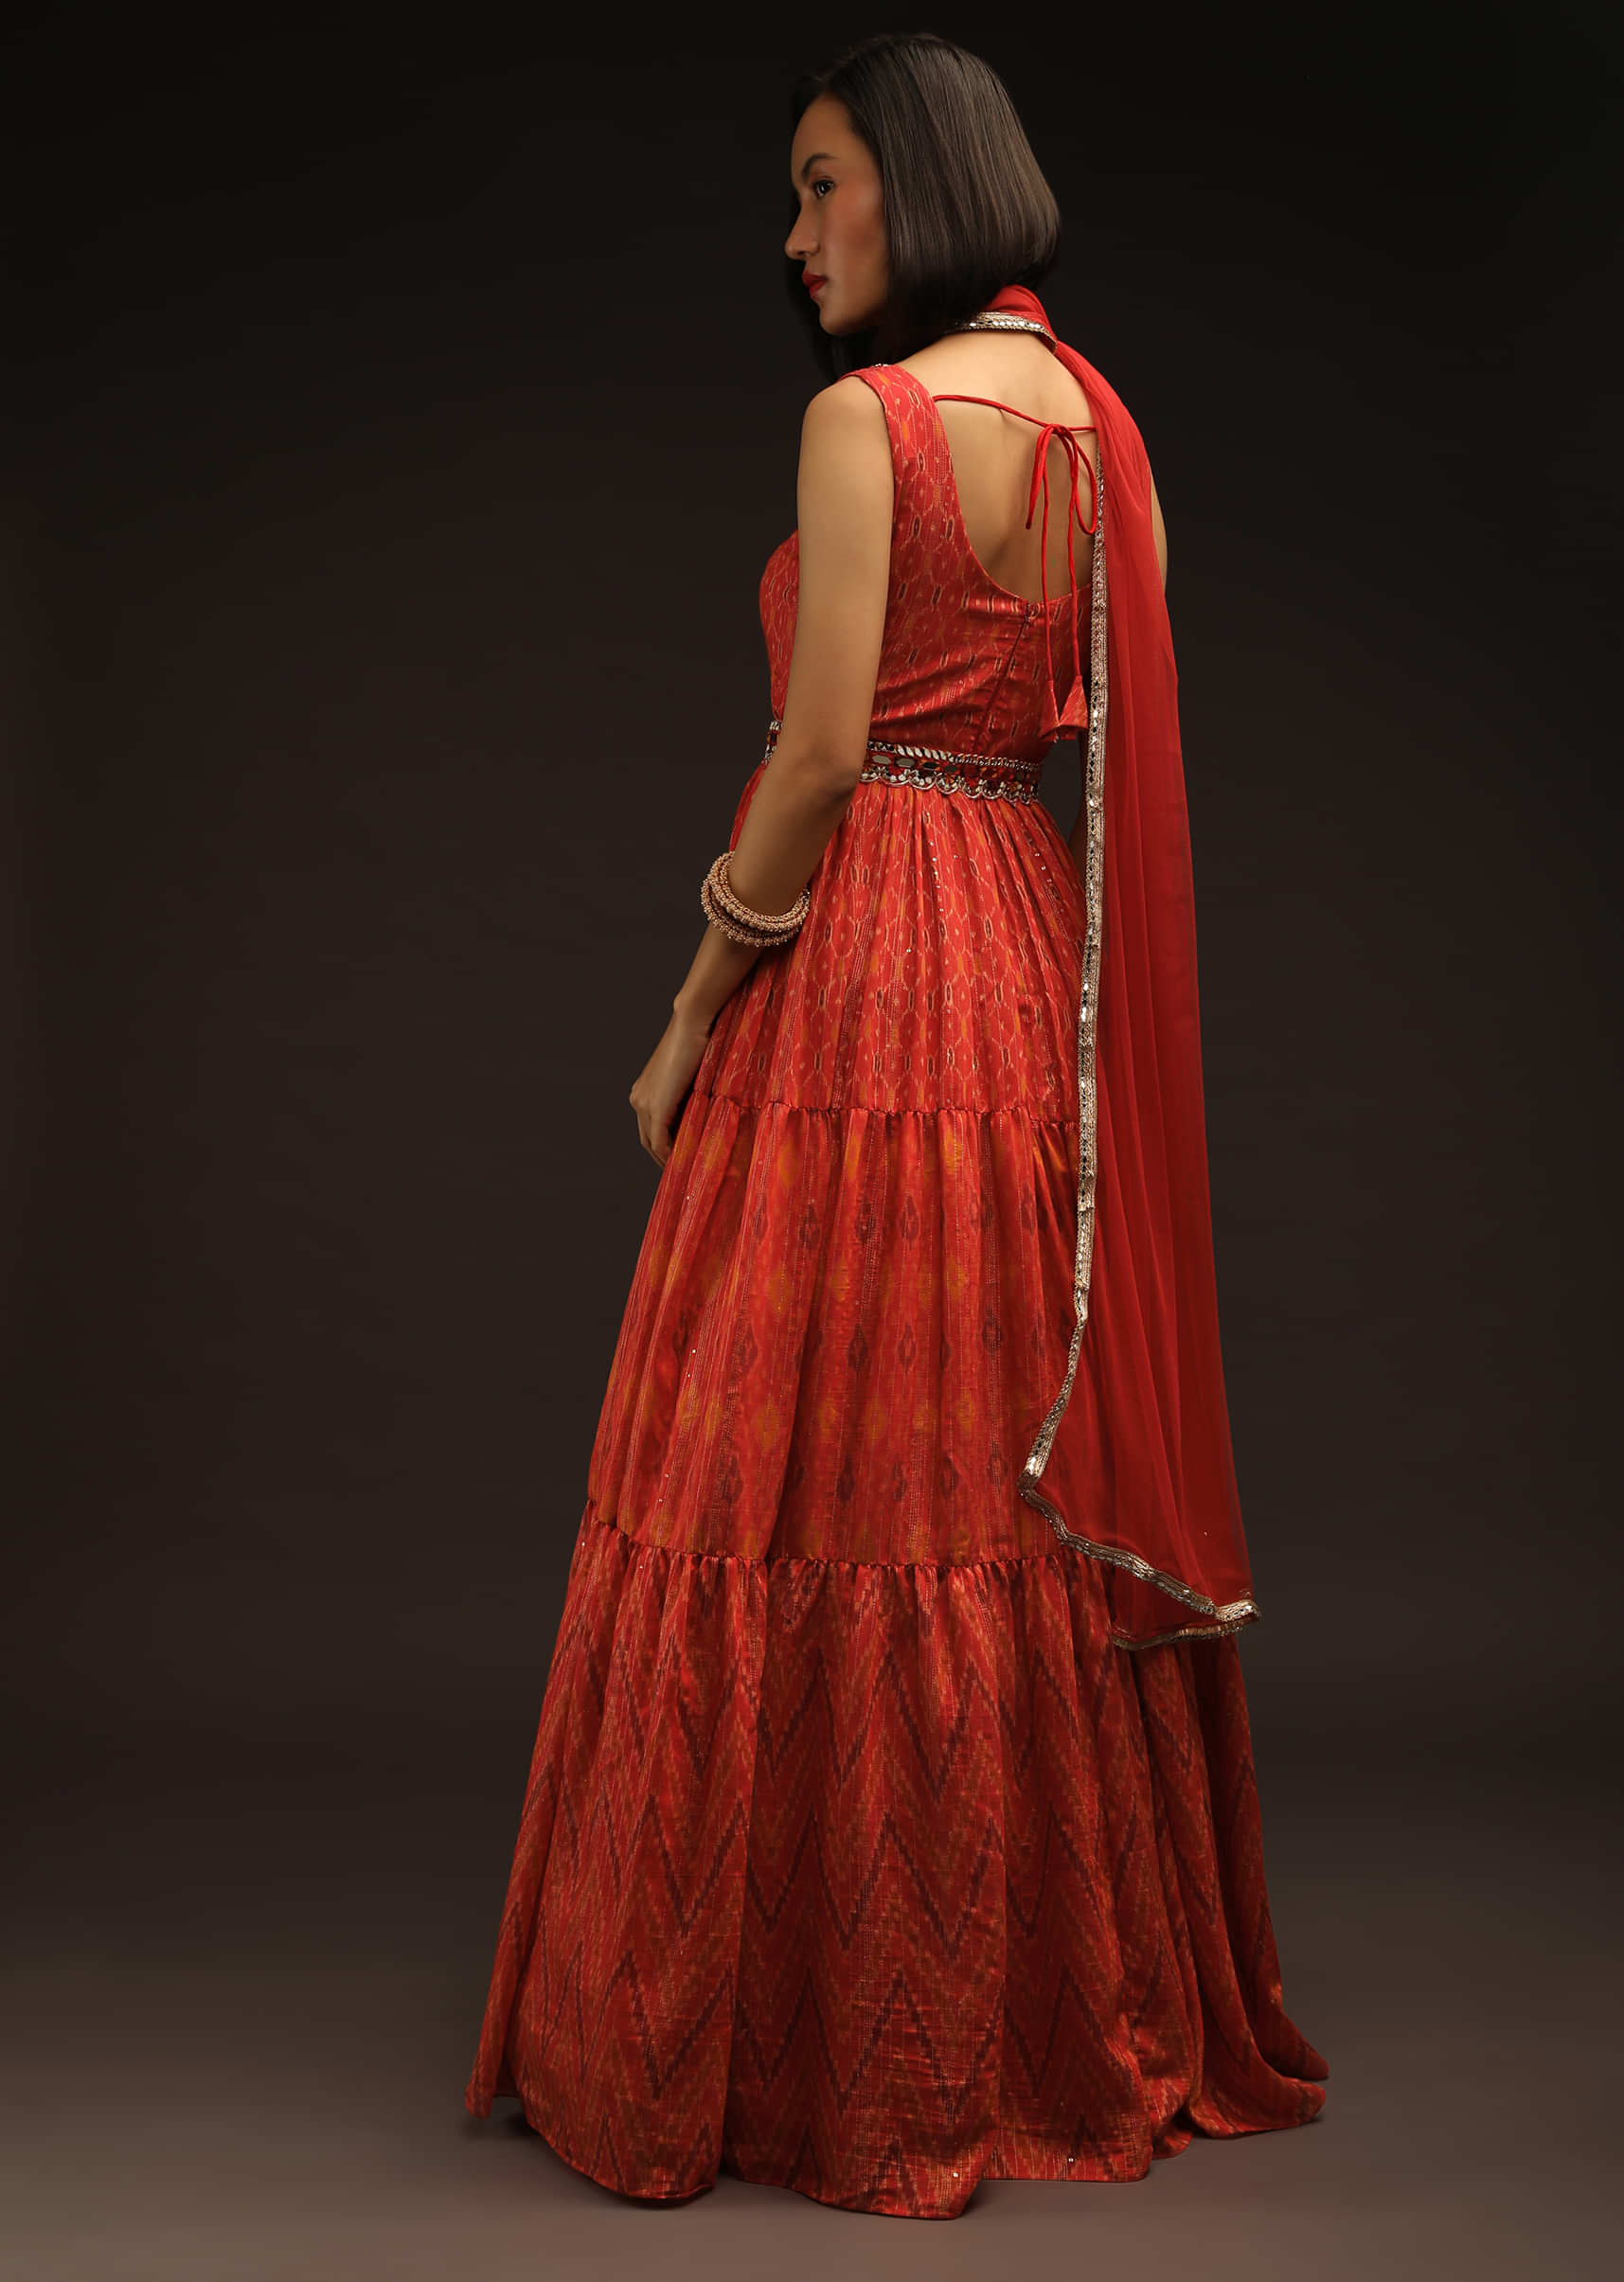 Tomato Red Anarkali Suit In Silk With Ikkat Print And Mirror Embroidery